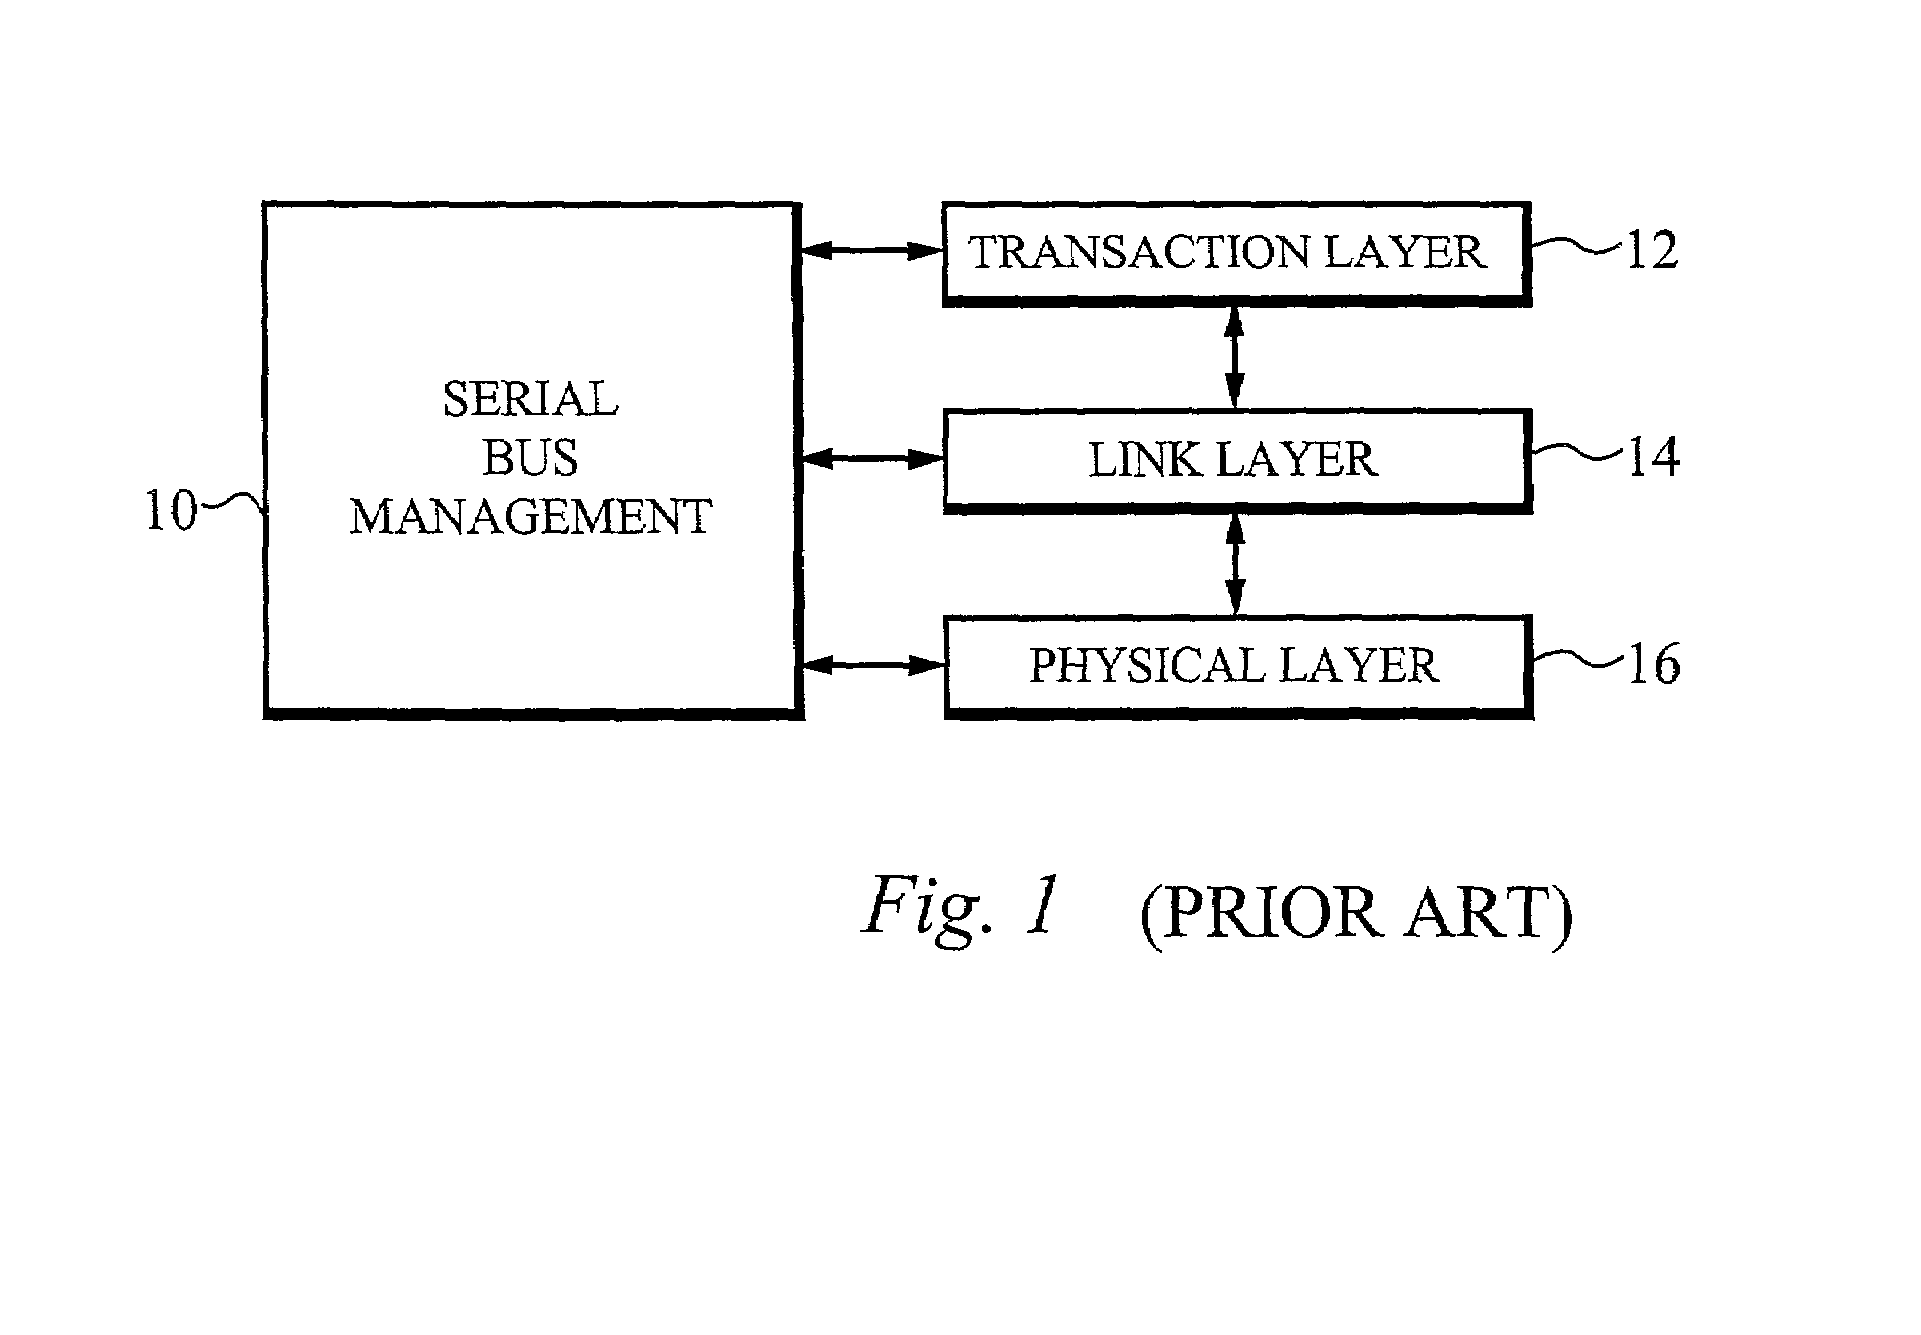 Method of and apparatus for providing isochronous services over switched ethernet including a home network wall plate having a combined IEEE 1394 and ethernet modified hub